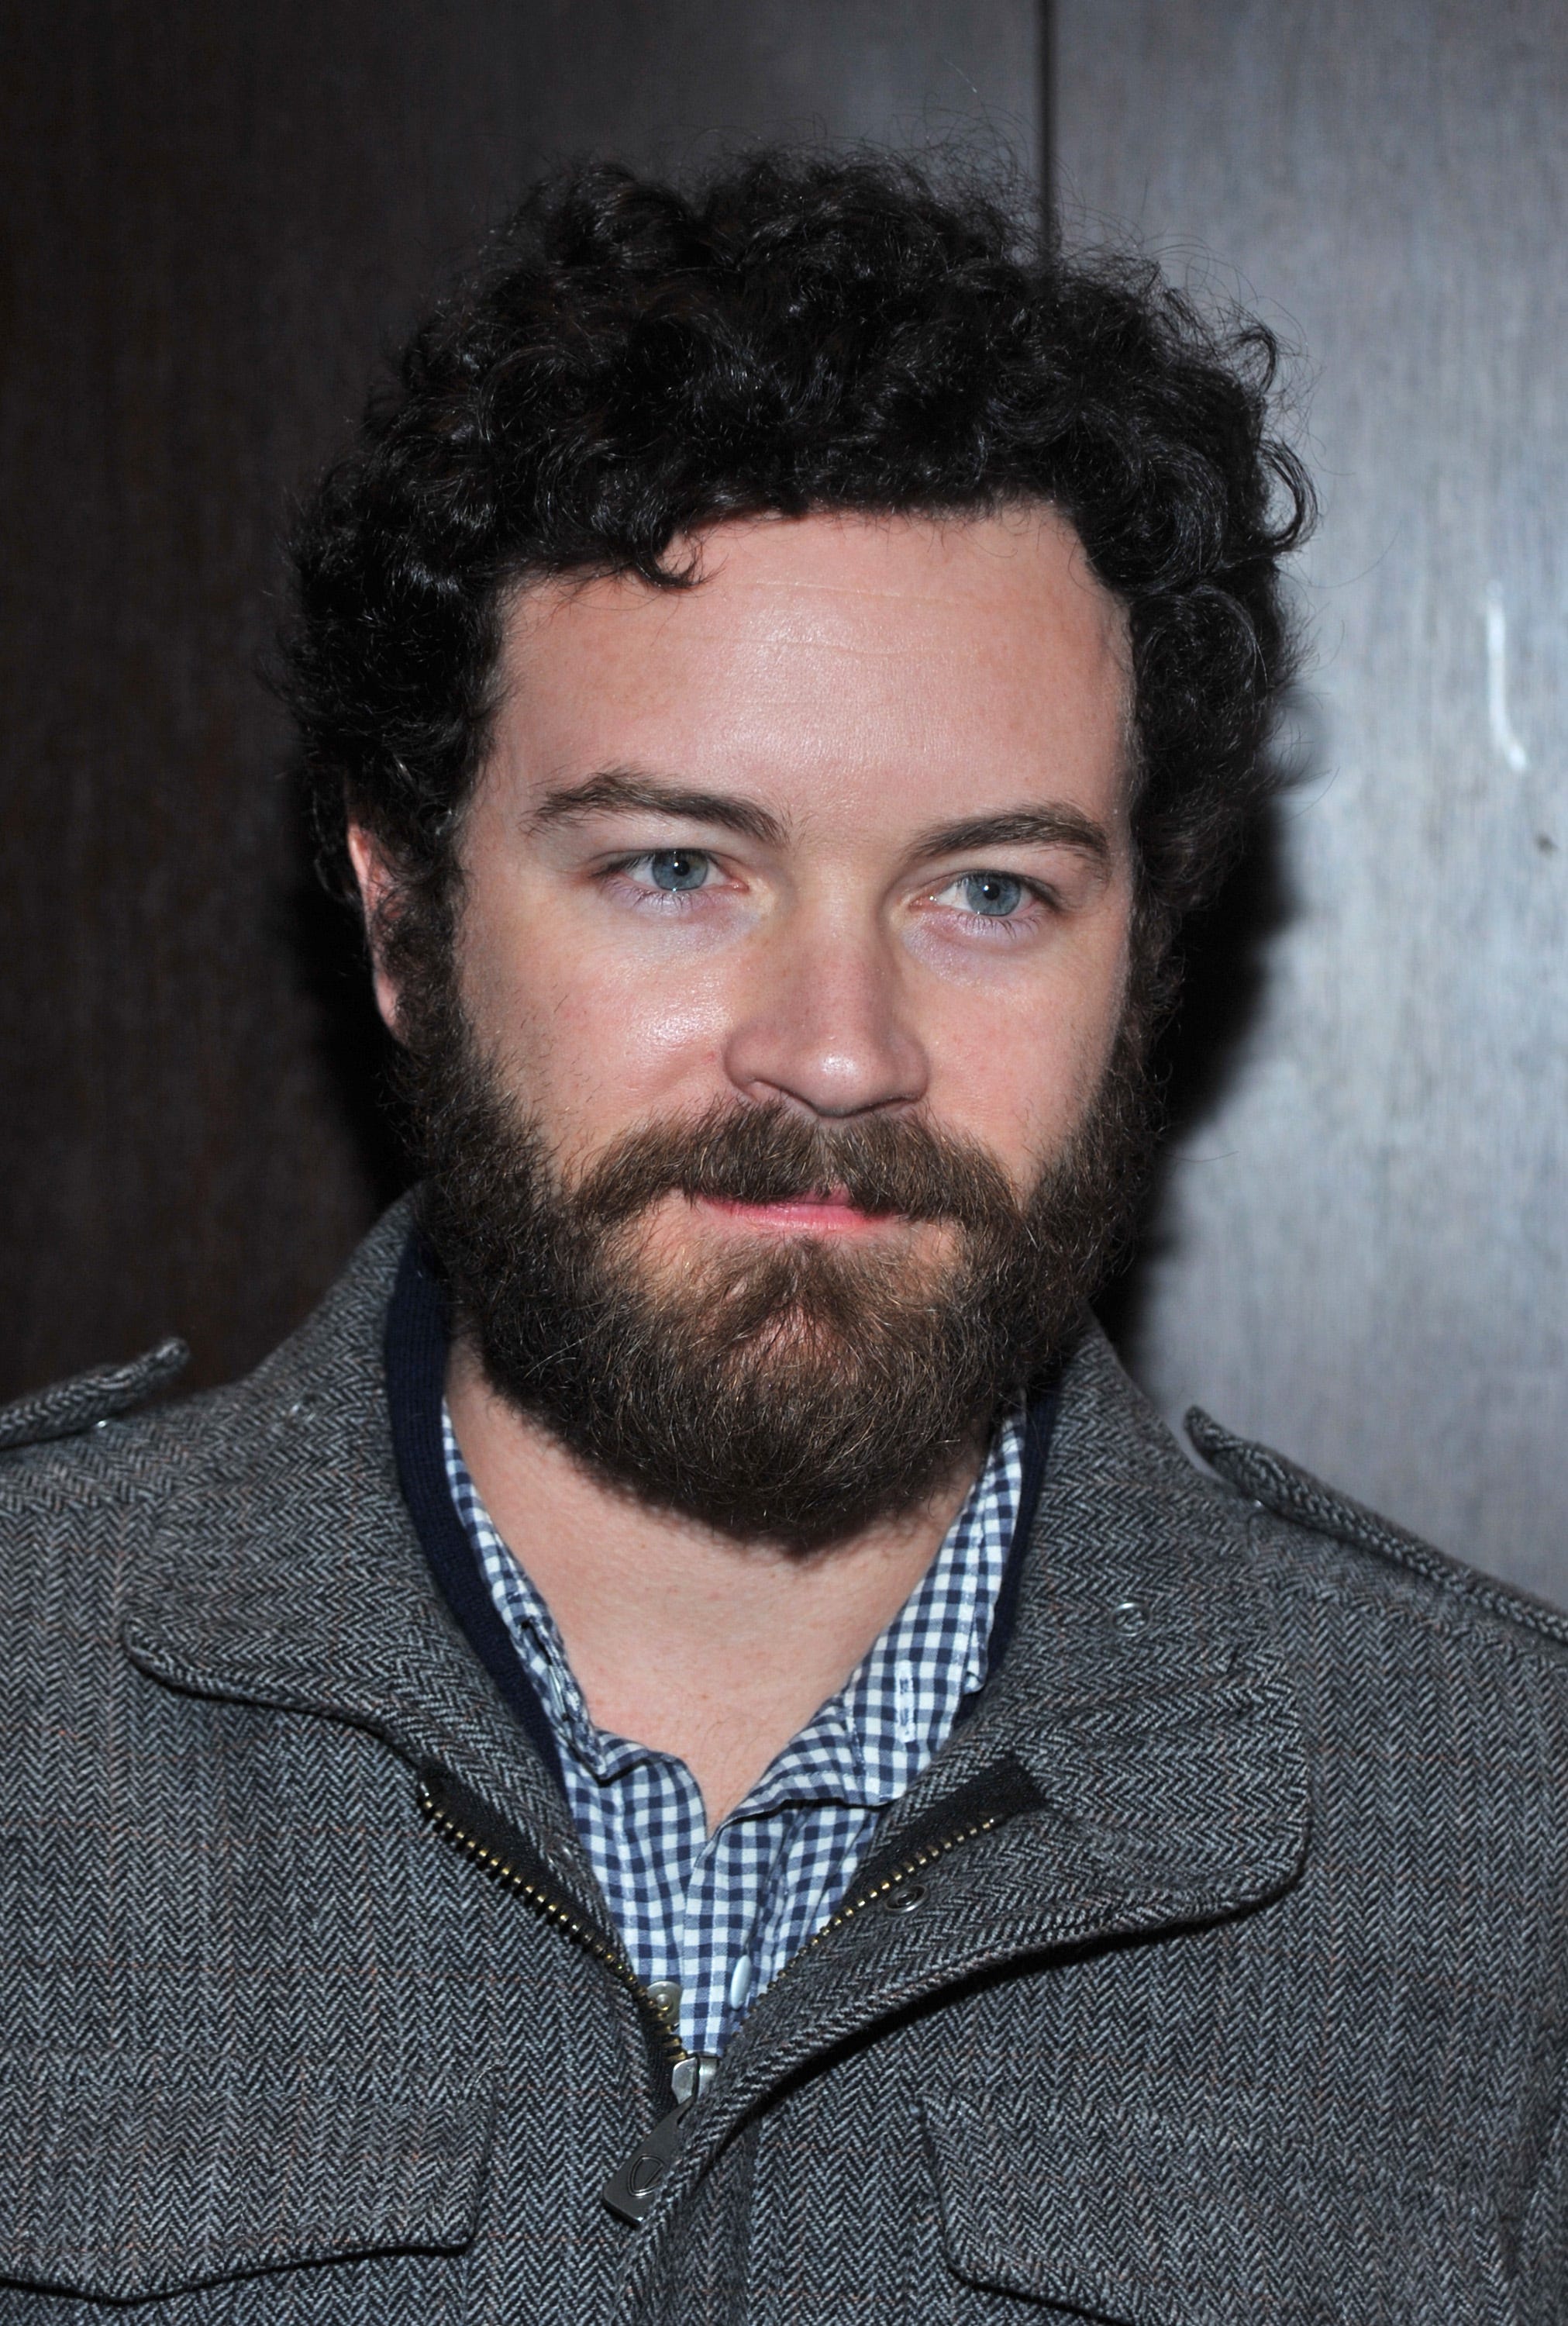 Netflix executive fired after saying company didn&apos;t believe Danny Masterson accusers